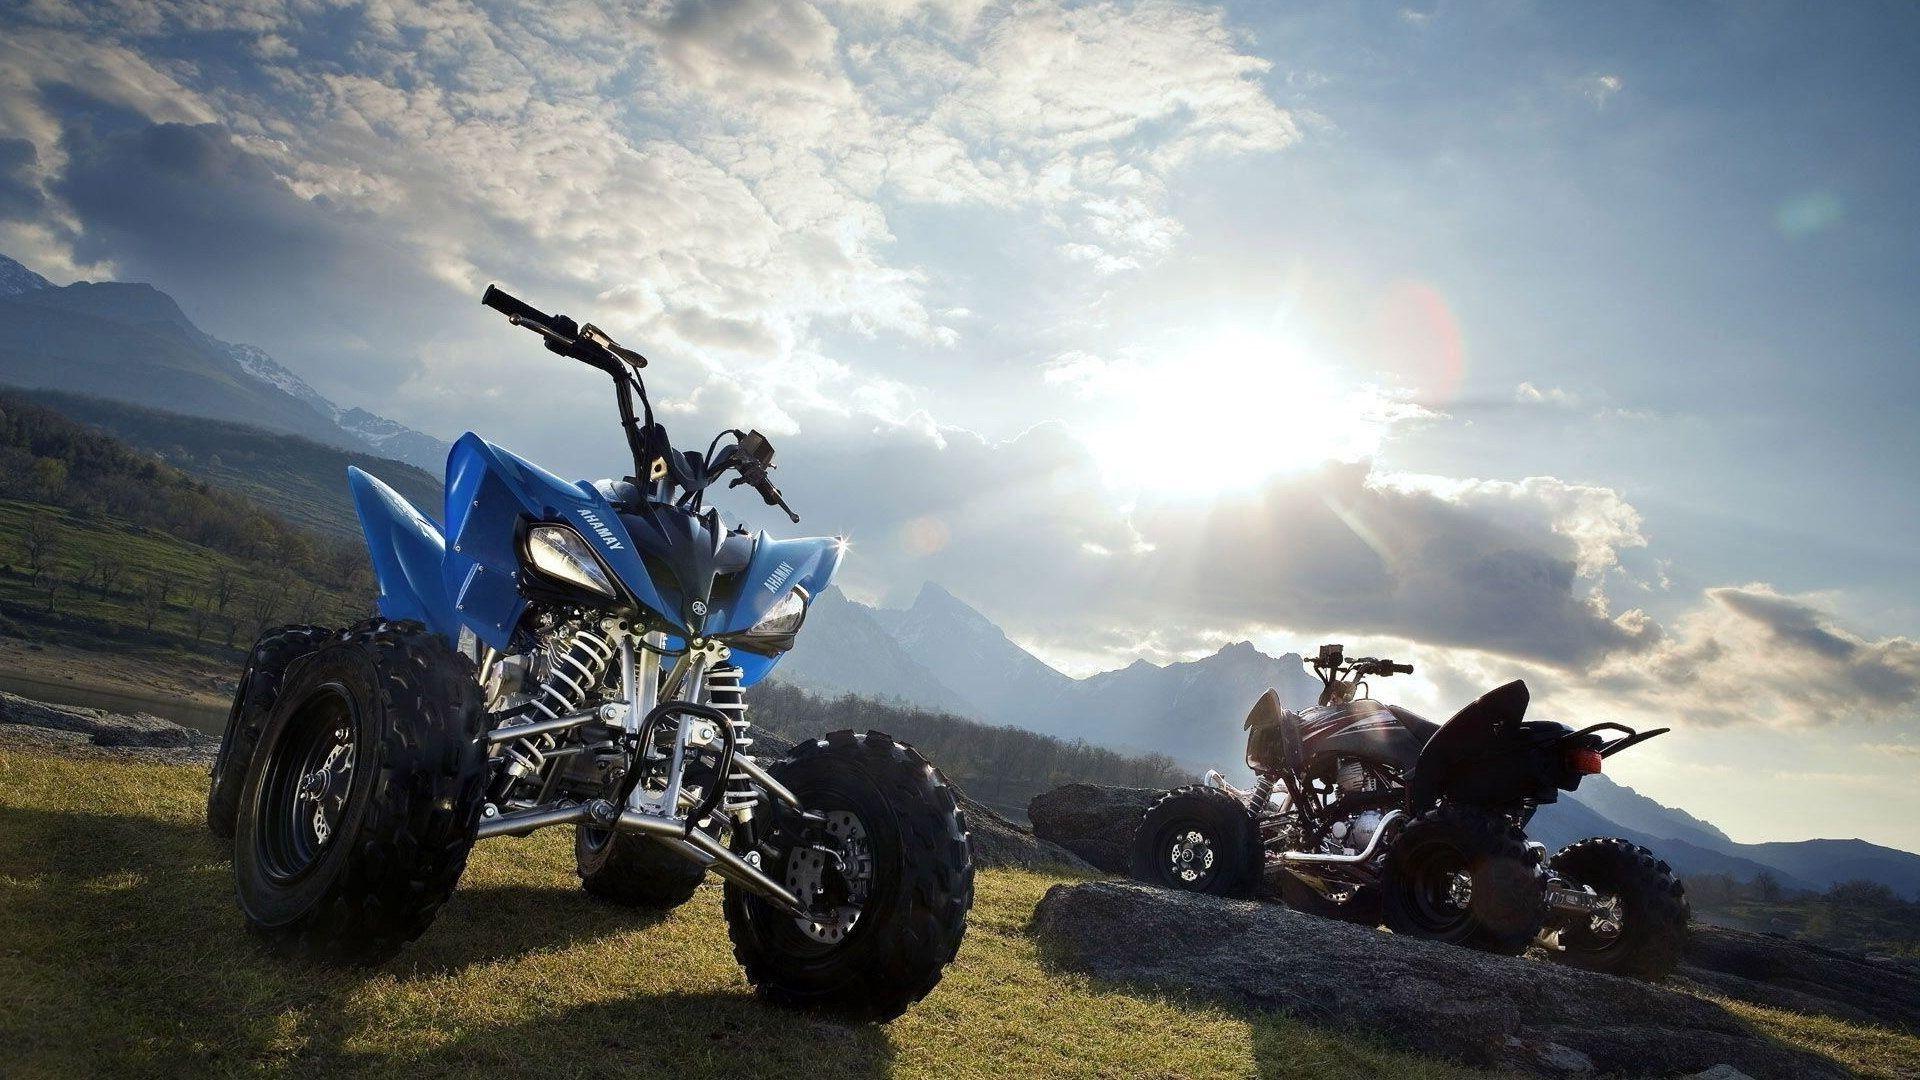 The nature of the mountain and Quad bikes